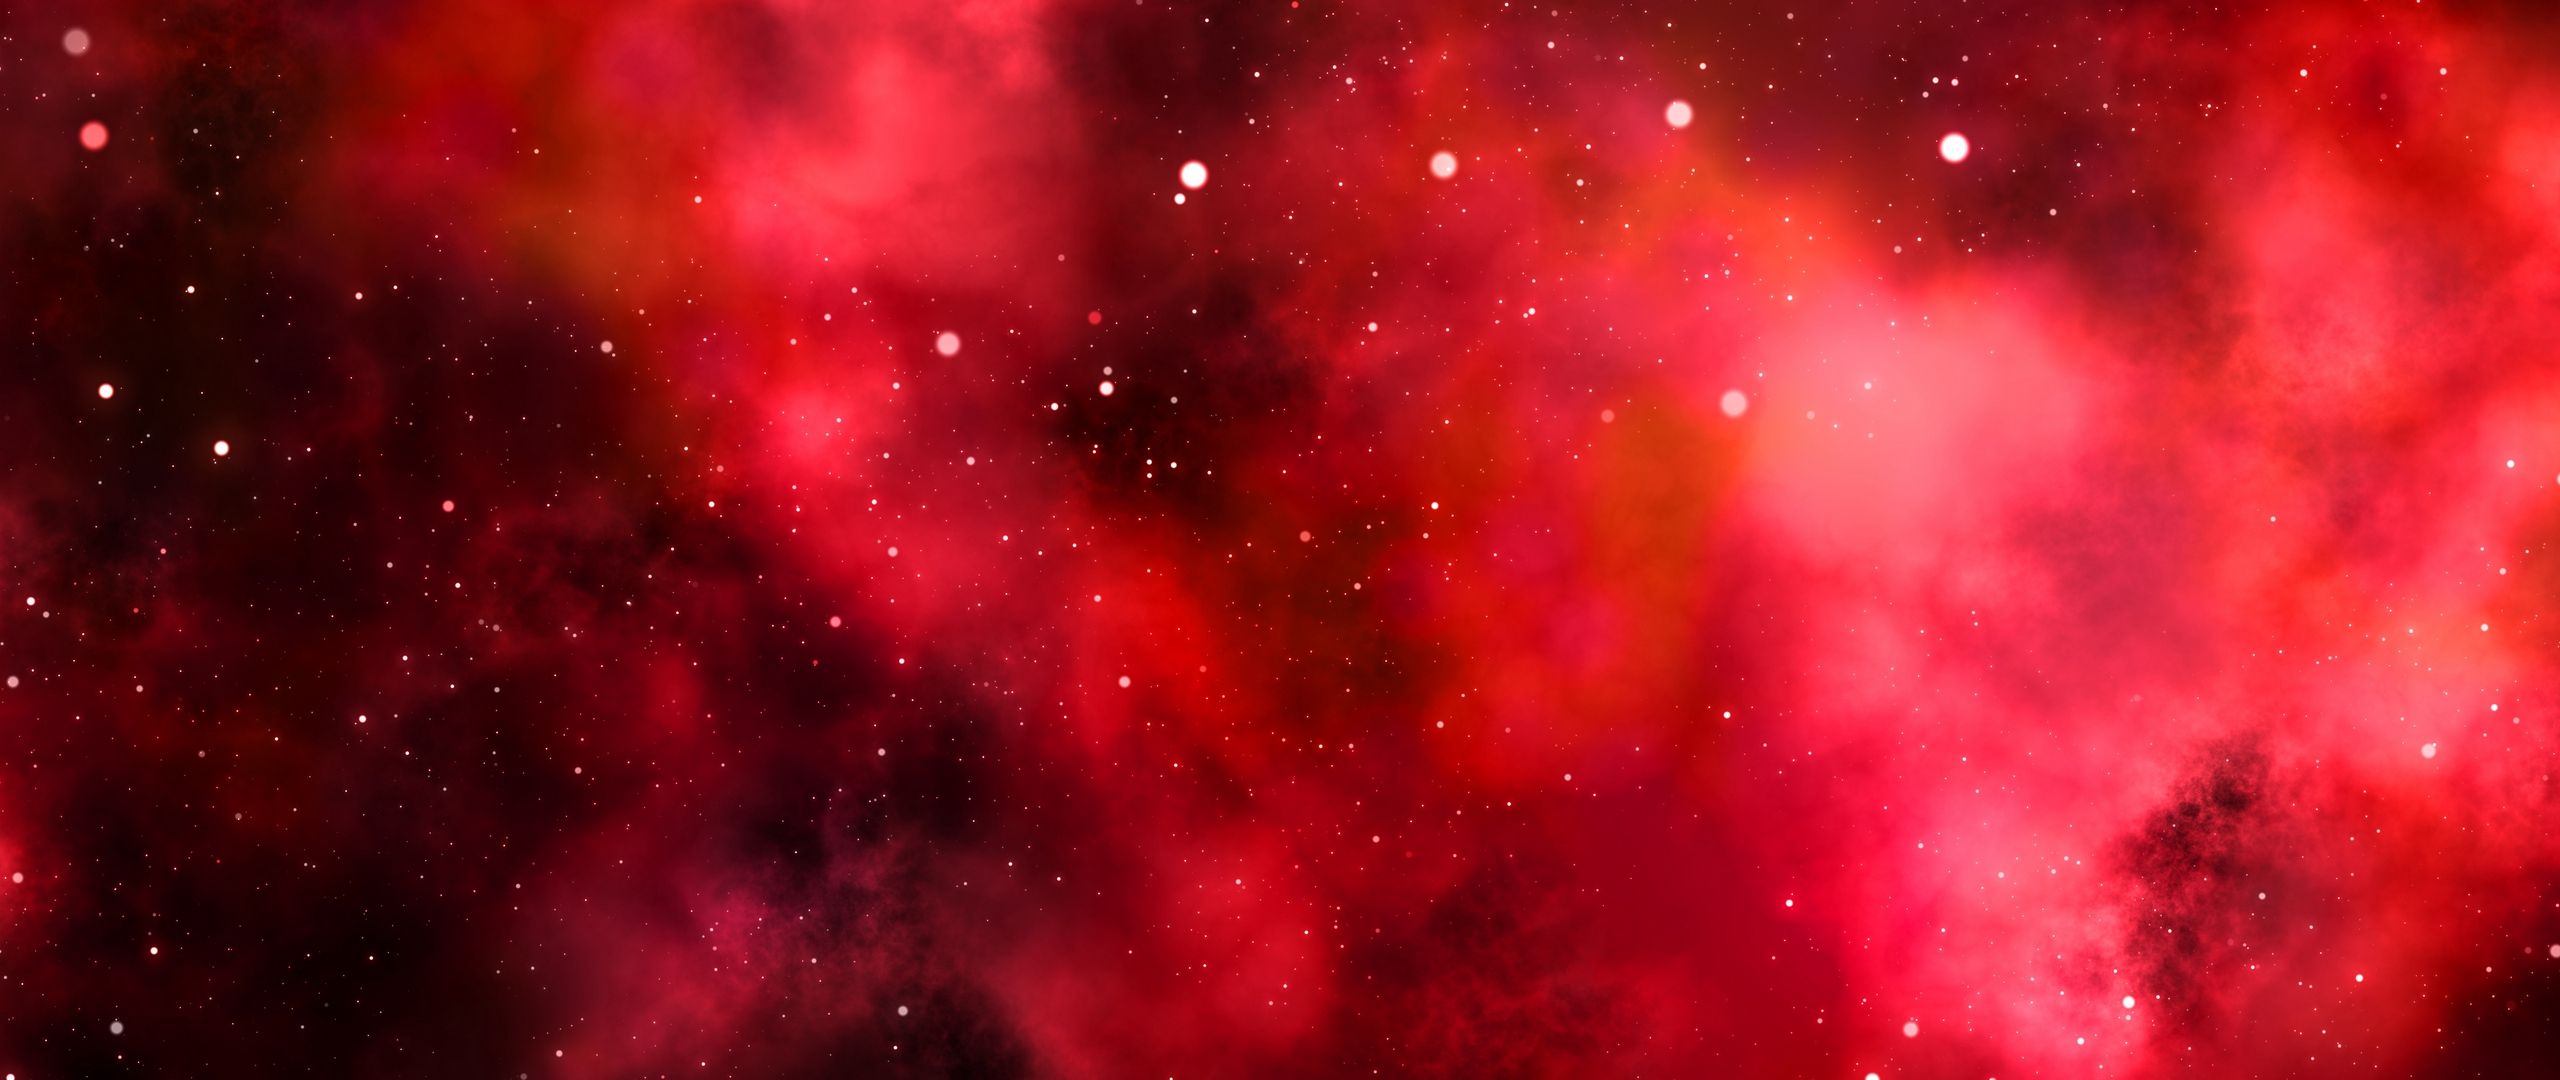 Free Vector | Realistic space with planets stars and red clouds